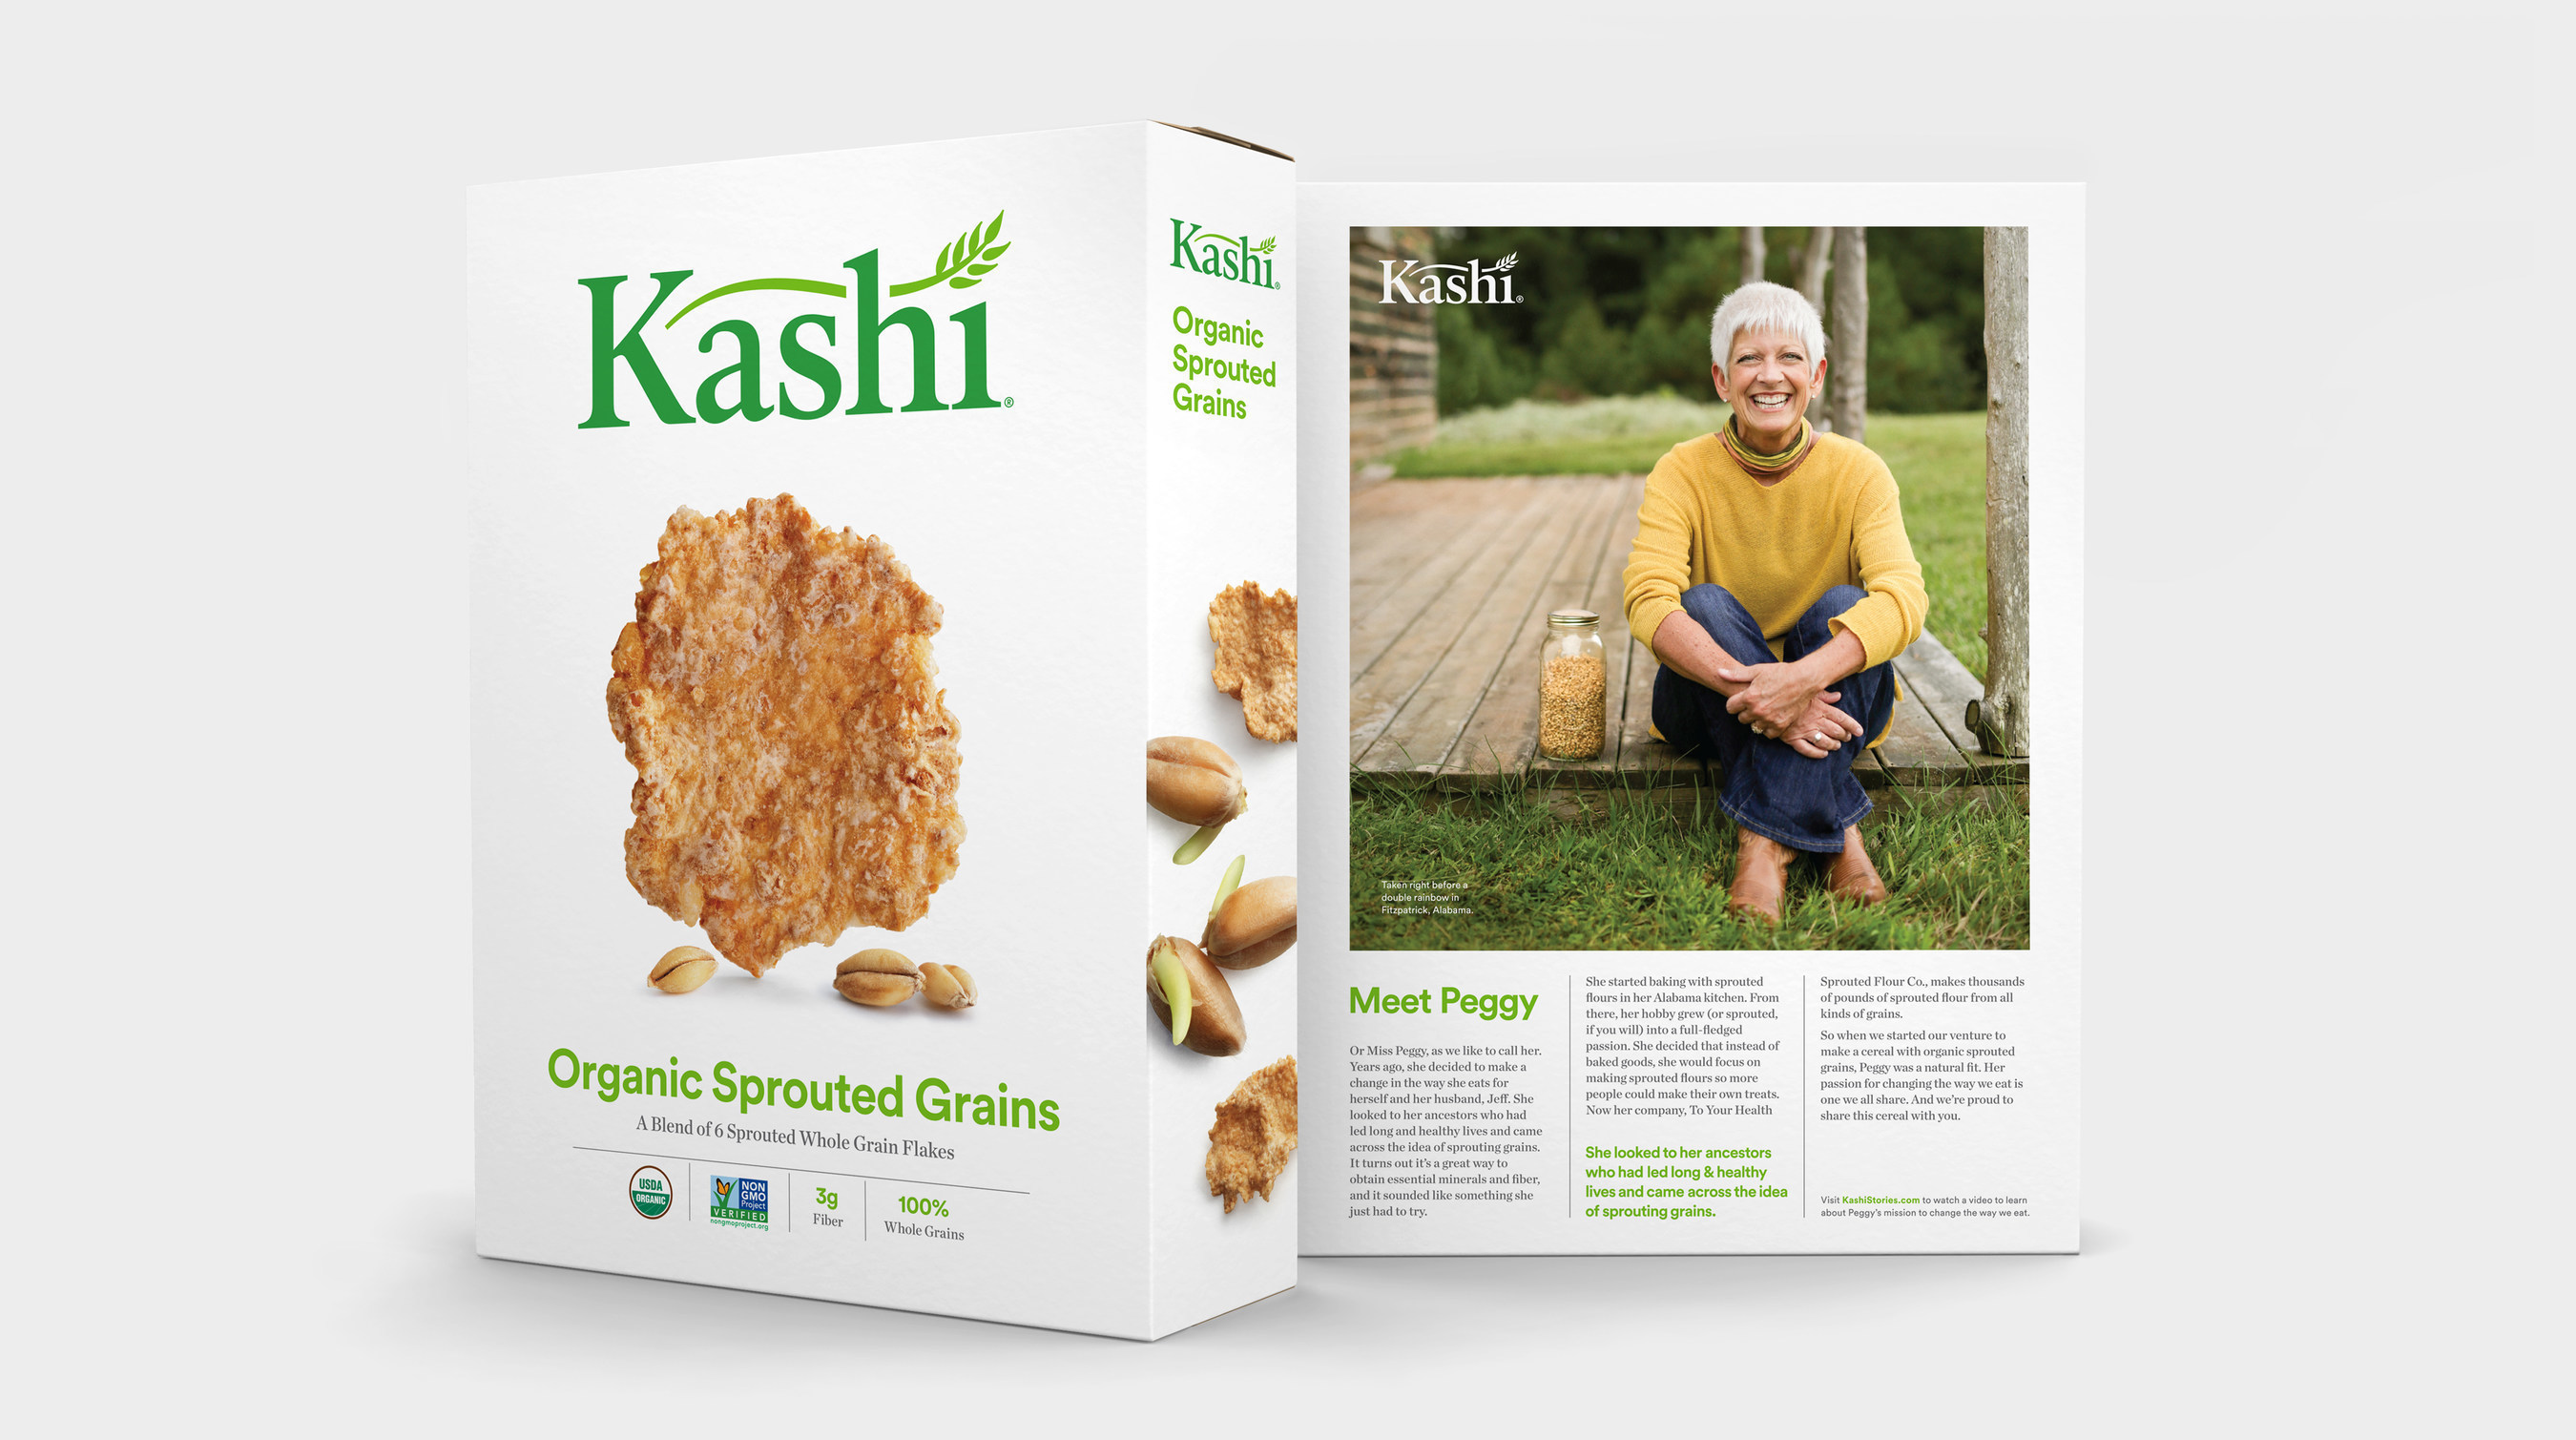 Kashi is launching a new and refreshed brand identity that reflects its belief that food should not only taste good, but do good.